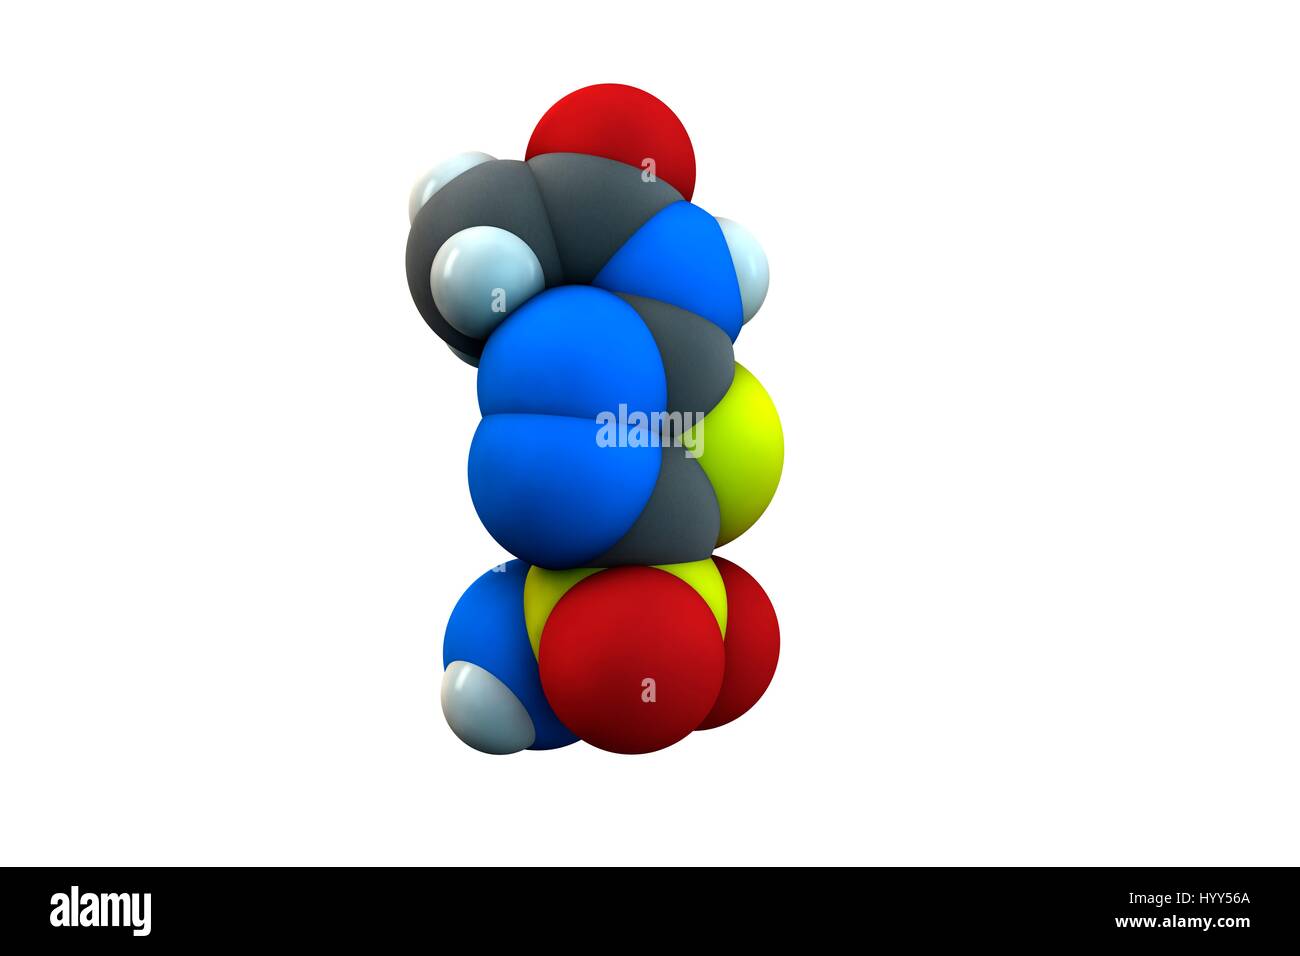 Acetazolamide diuretic drug molecule. Chemical formula is C4H6N4O3S2. Atoms are represented as spheres: carbon (grey), hydrogen (white), nitrogen (blue), oxygen (red), sulphur (yellow). Illustration. Stock Photo